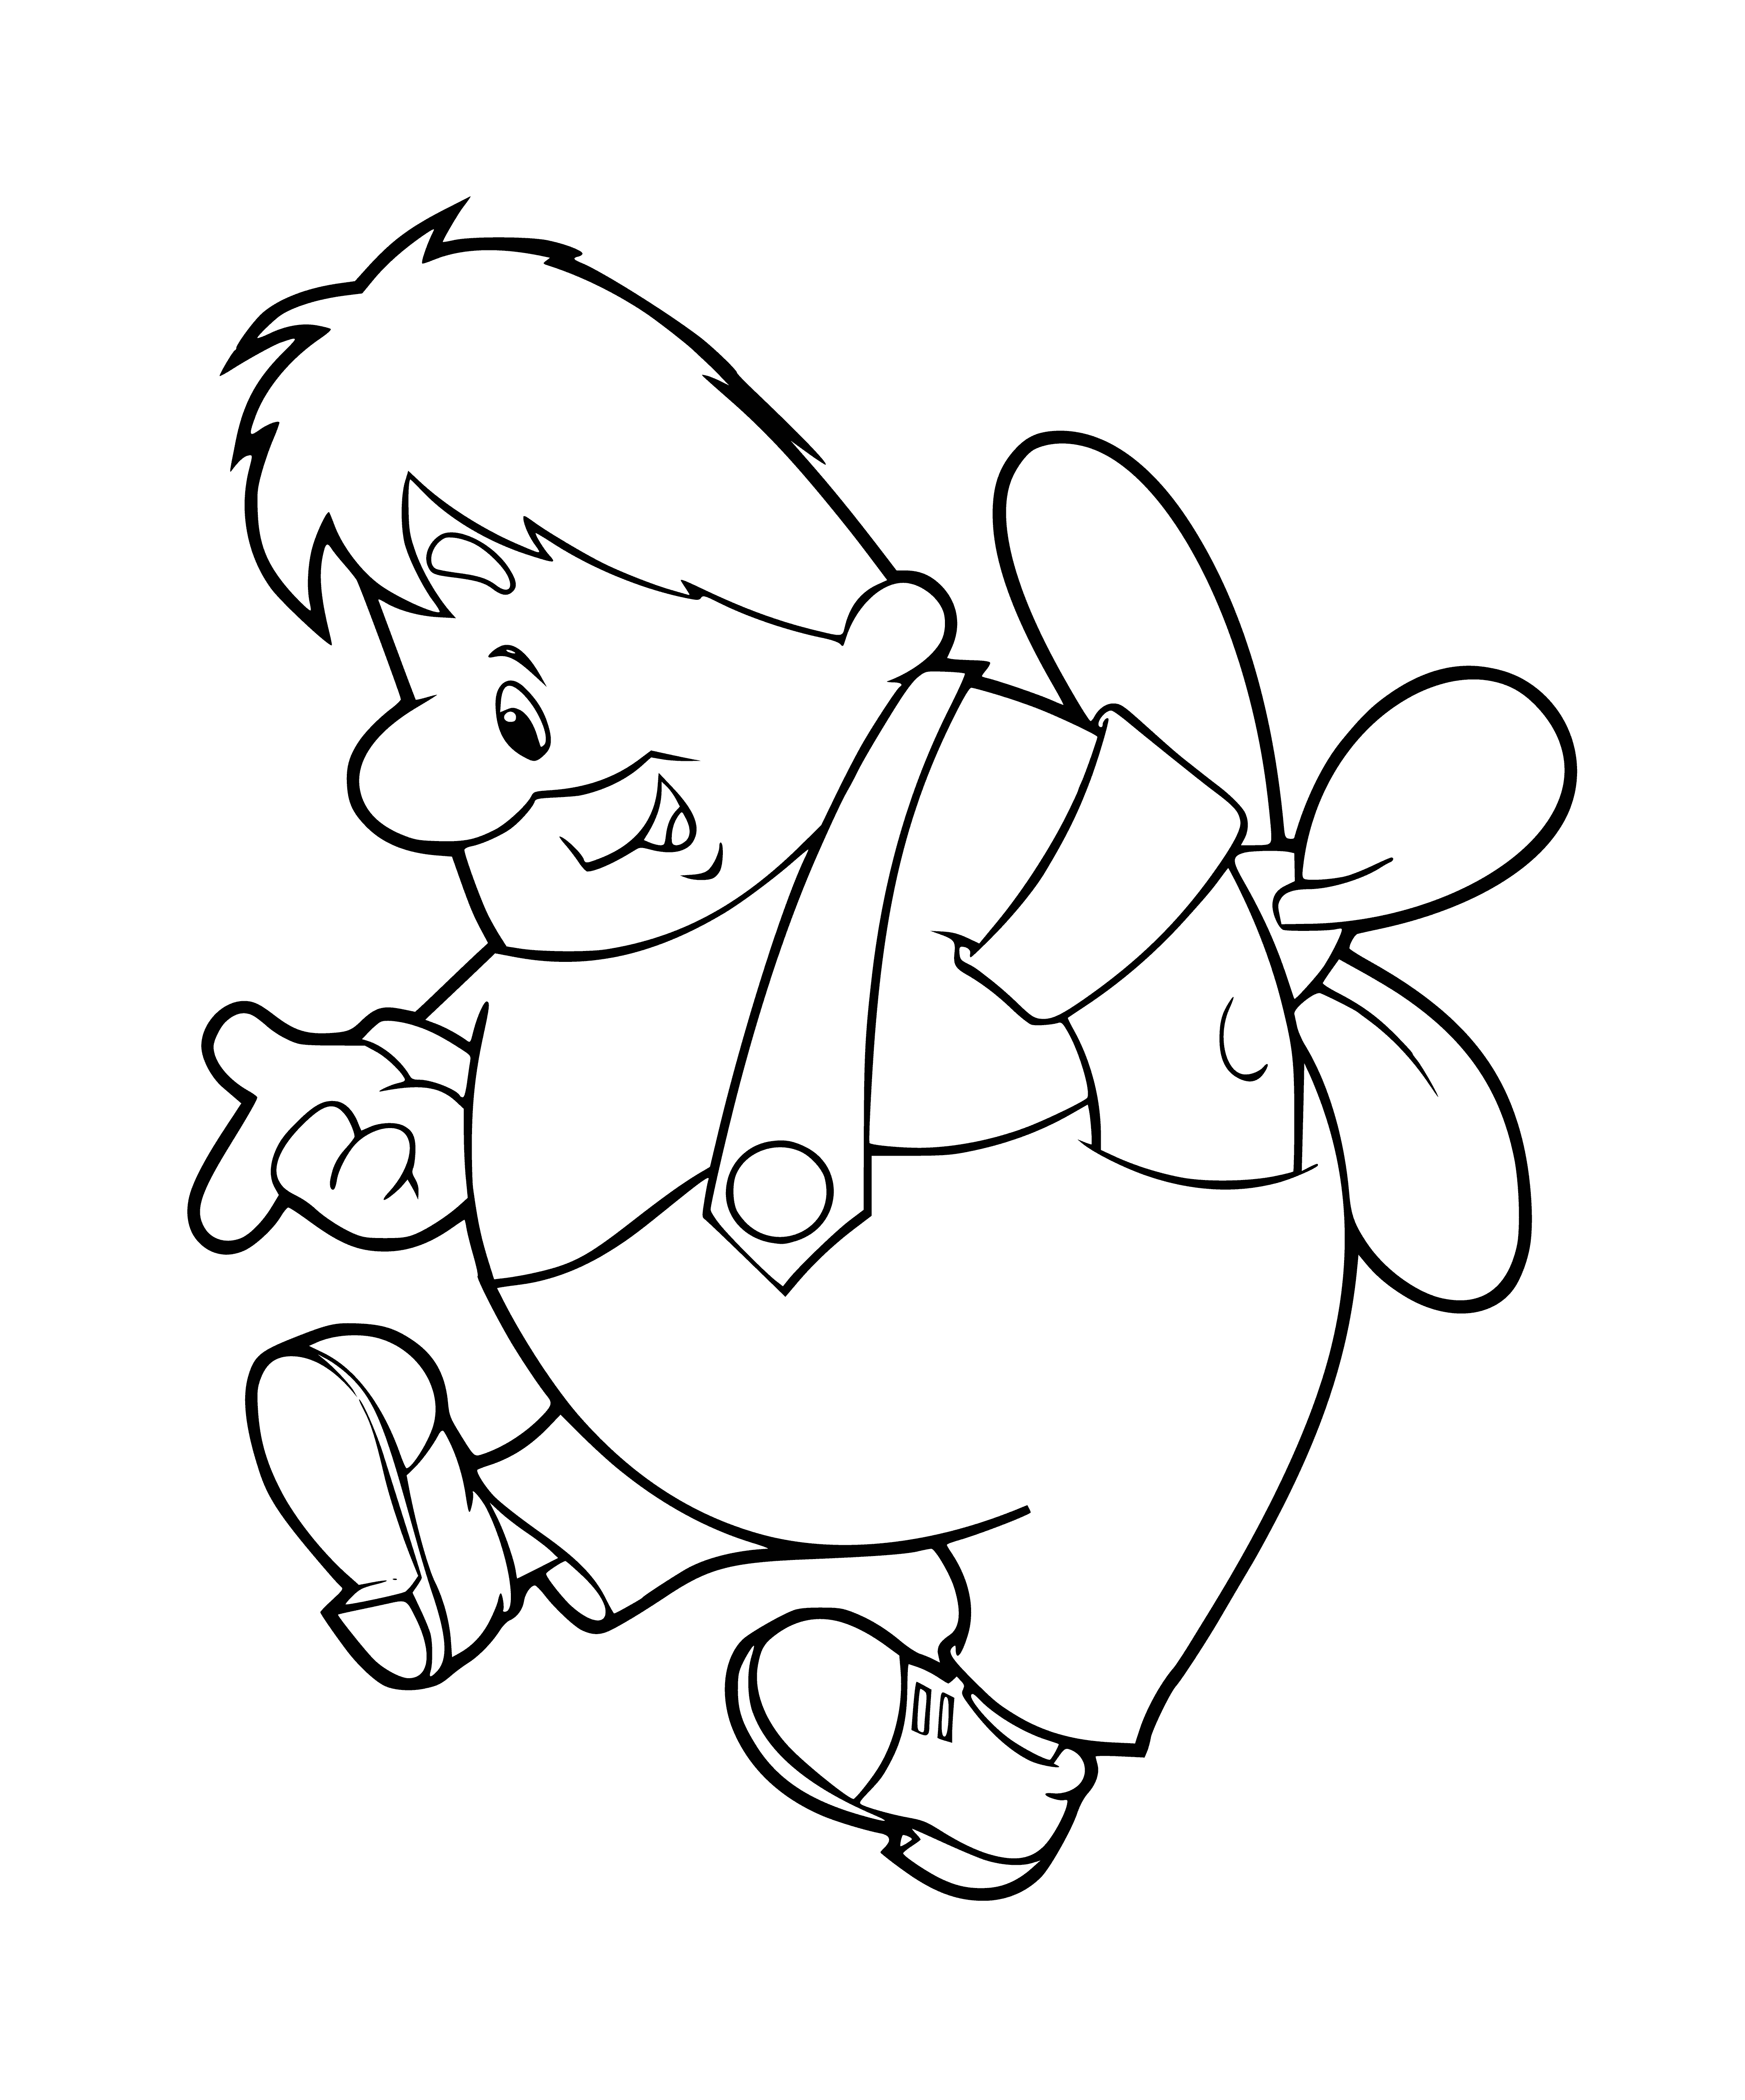 coloring page: The Kid sits on the roof with Carlson, who hangs his legs over the edge.